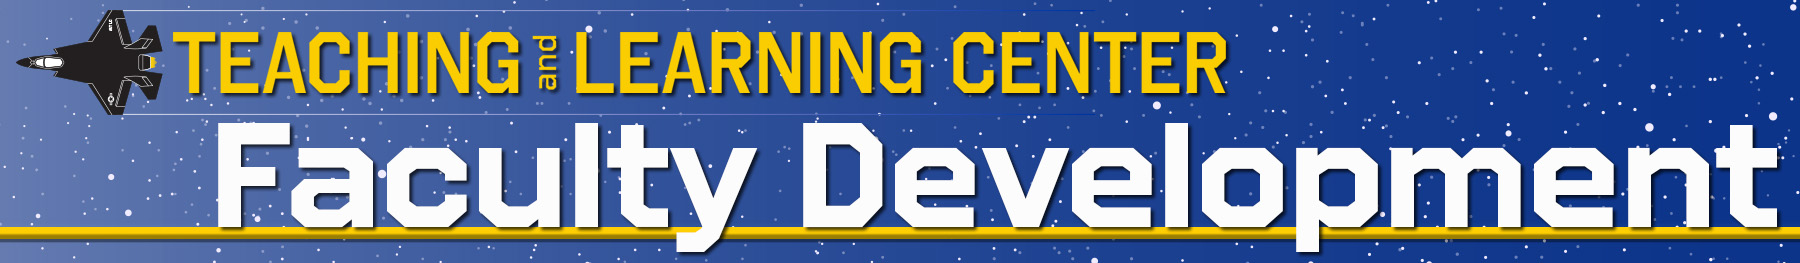 AU Teaching and Learning Center Faculty Development Banner